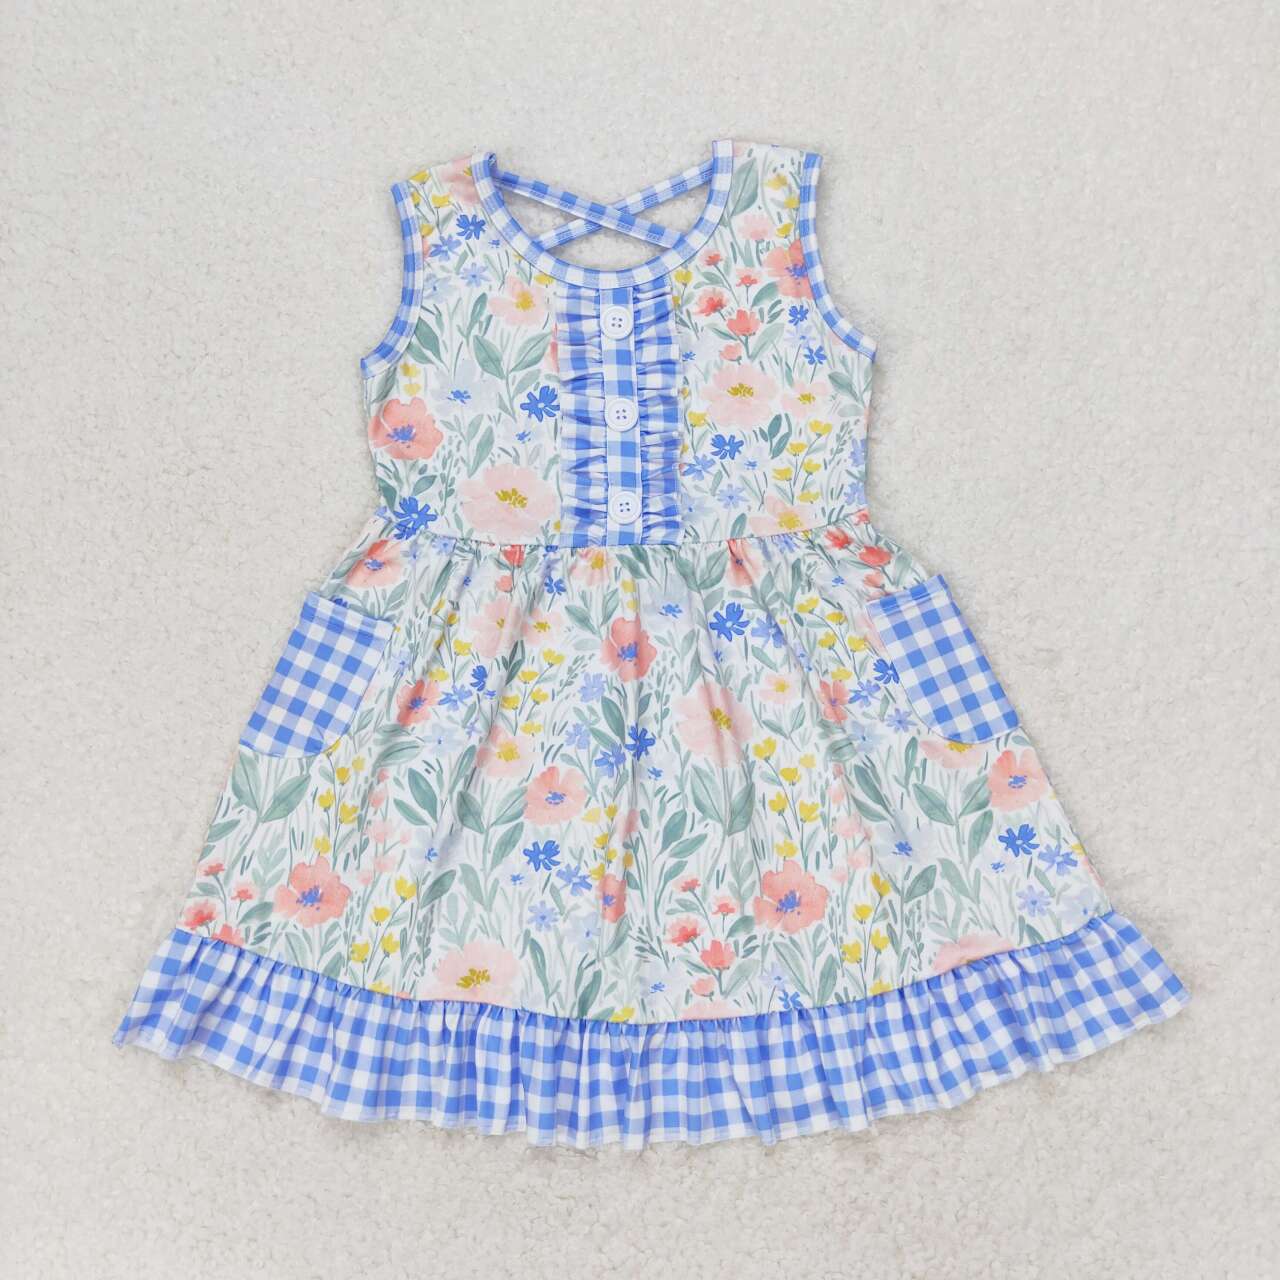 GSD1009 Floral floral blue and white plaid pocket lace sleeveless dress